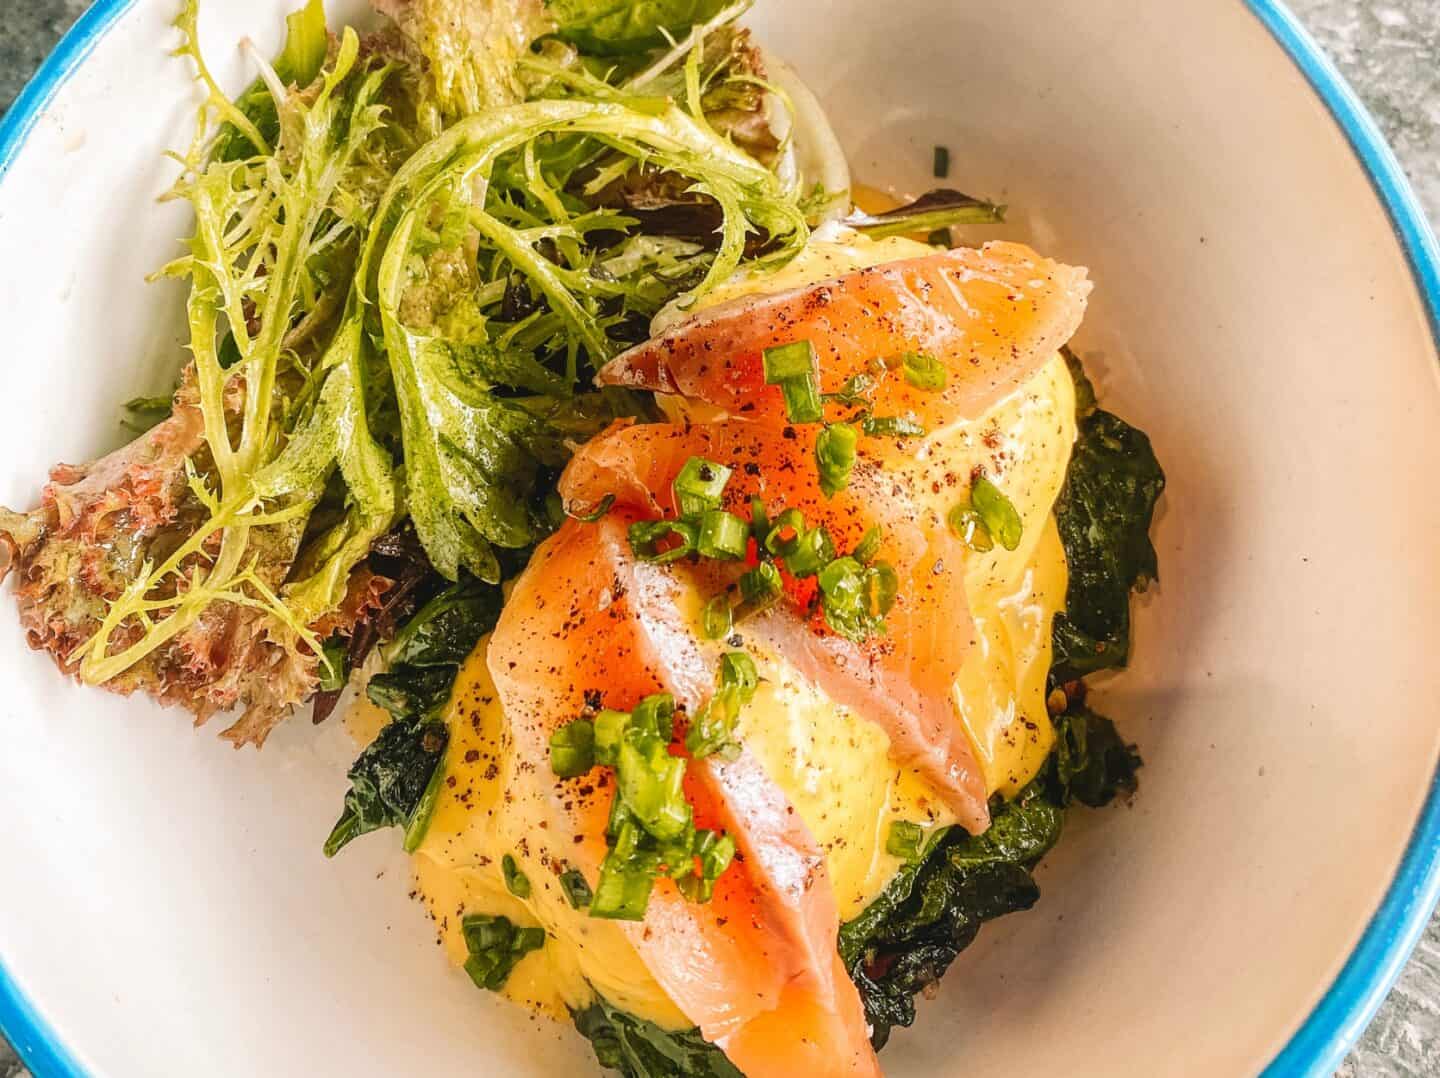 A delicious bowl of benedict smoked salmon from Butterman in Canggu